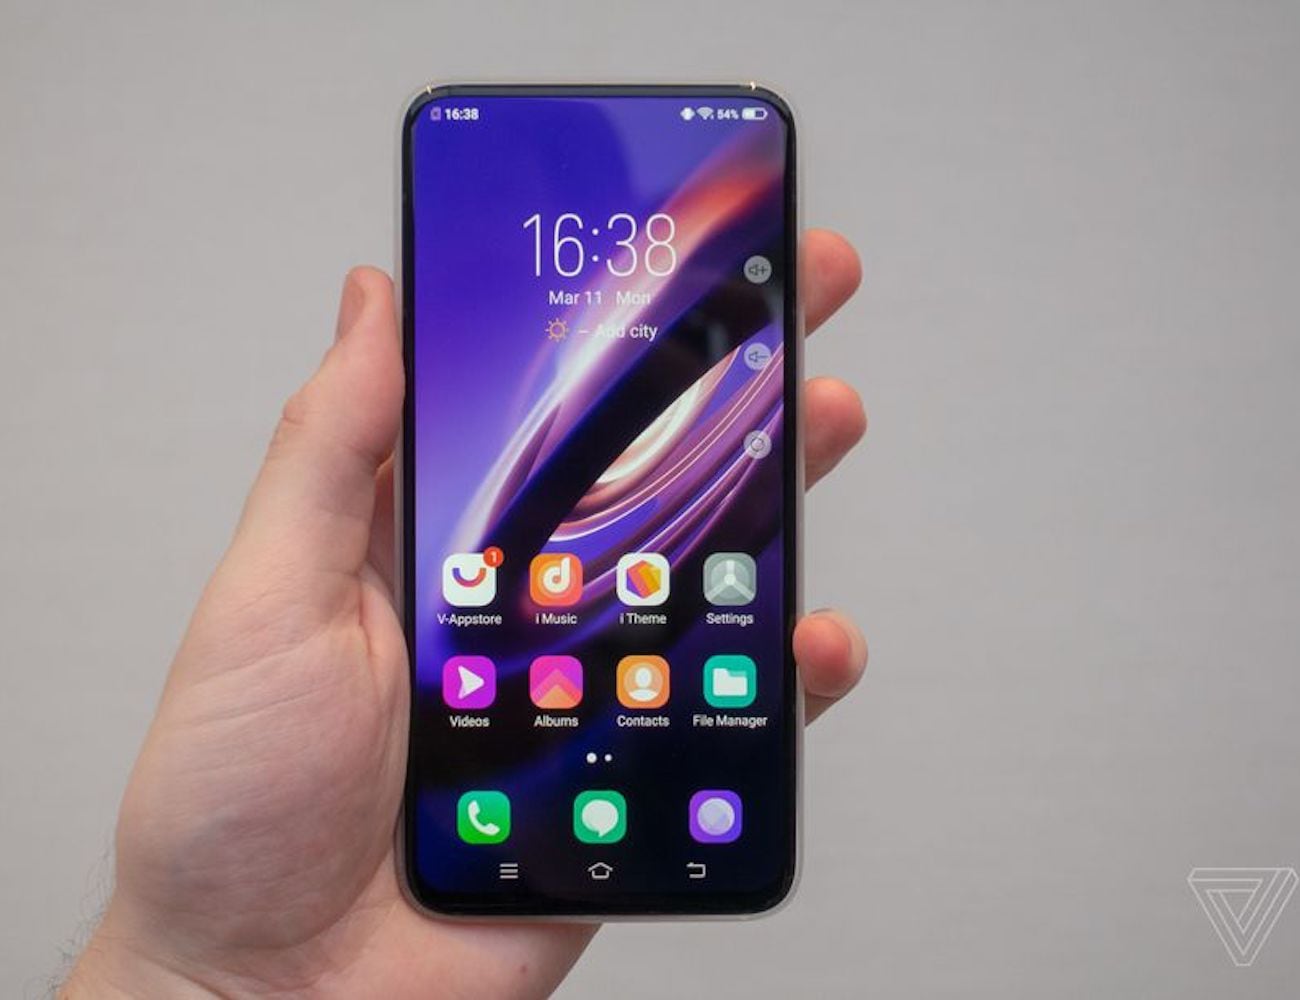 Vivo Apex 2019 5G Concept Phone is made from one piece of glass